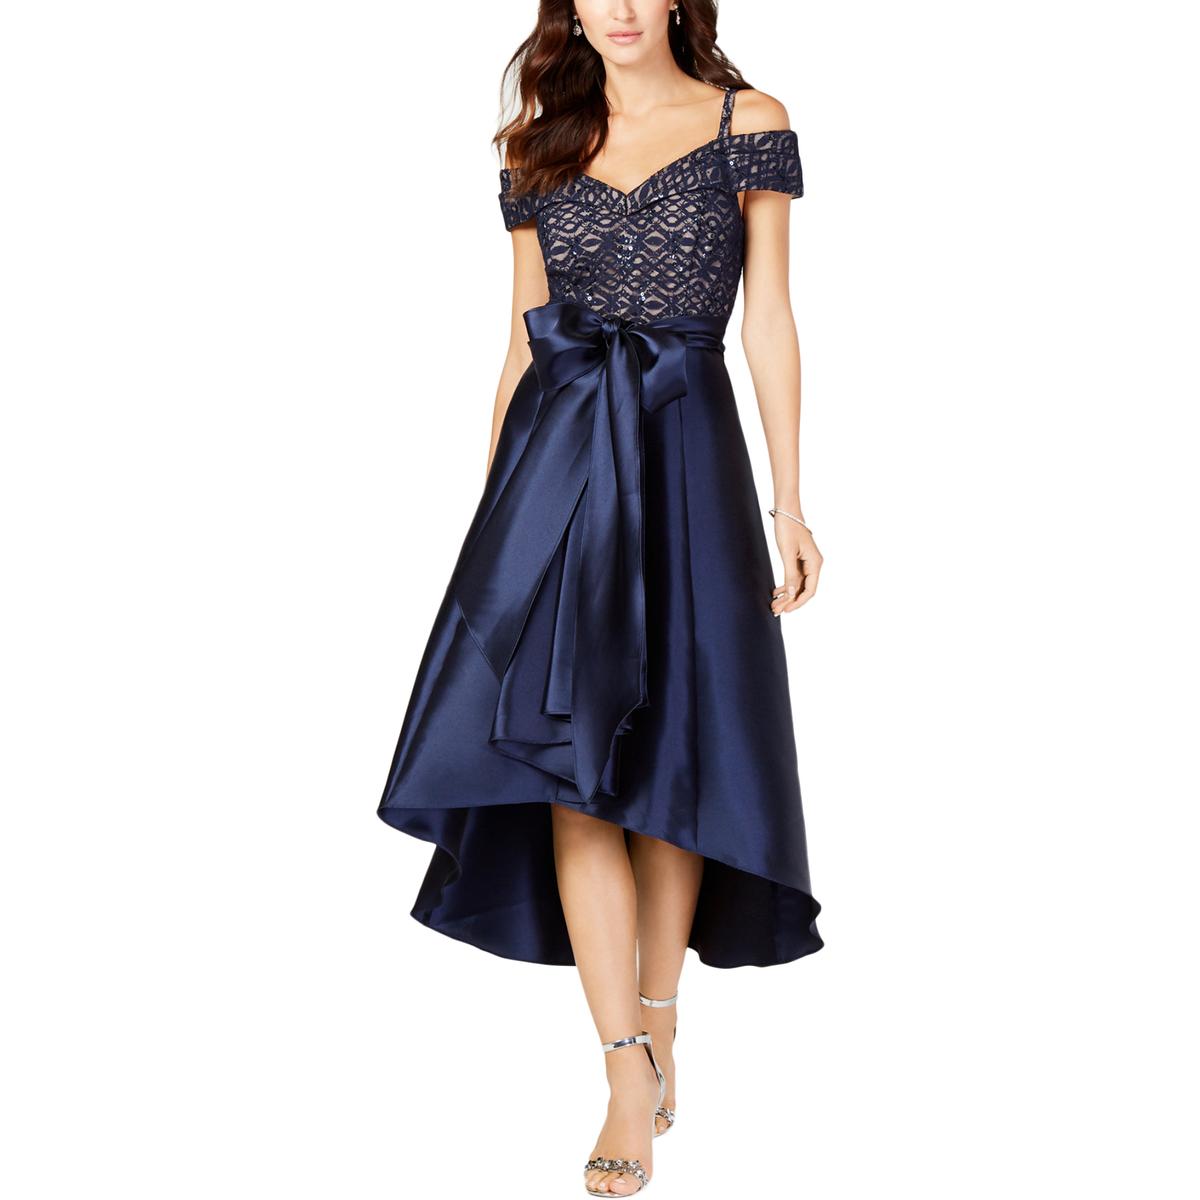 R&M Richards Womens Navy Lace Hi-Low Formal Evening Dress Gown 10 BHFO